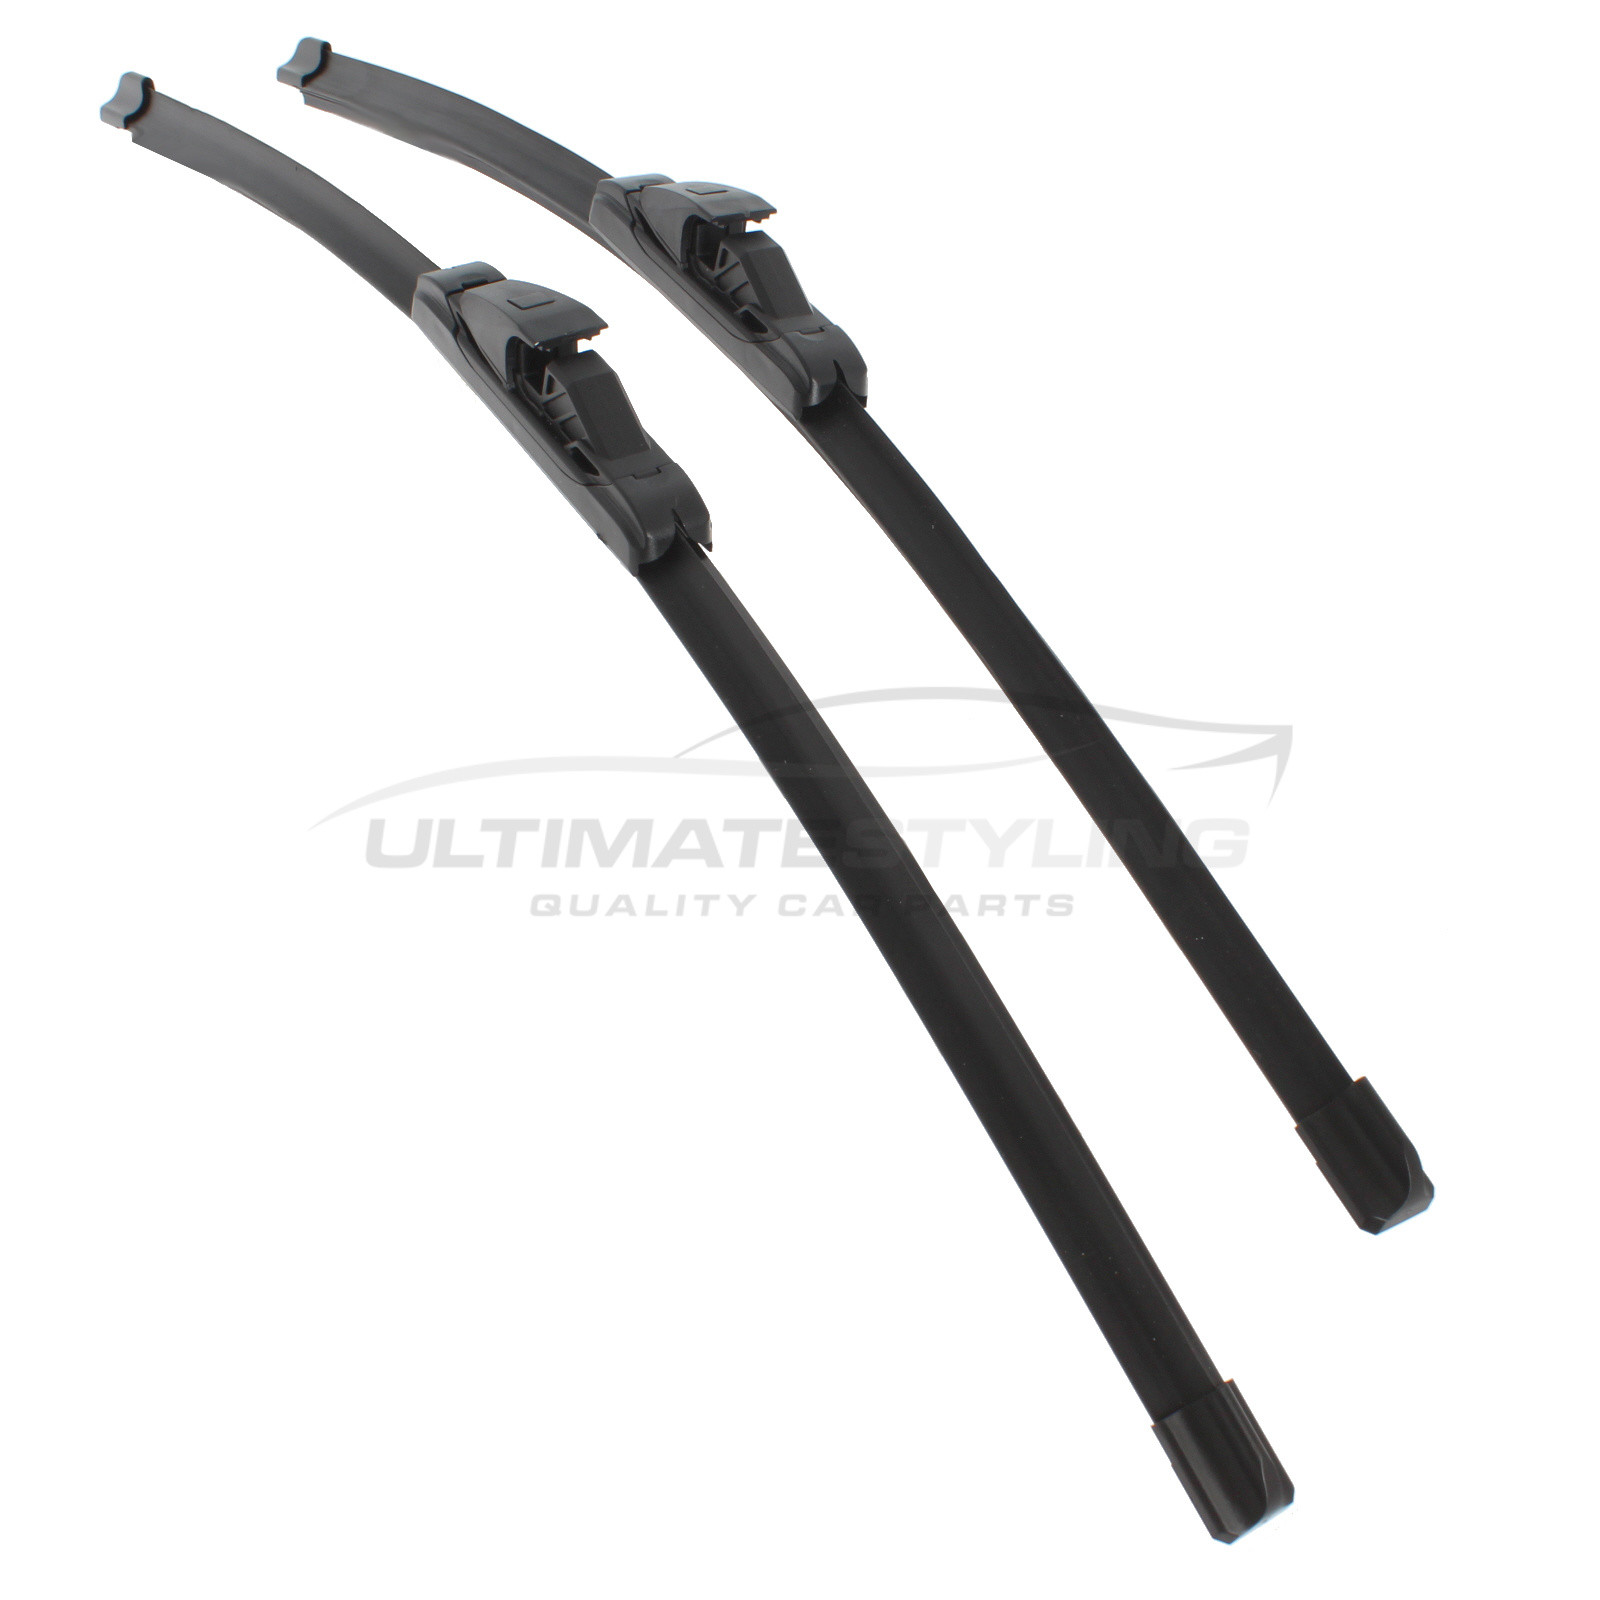 Drivers Side & Passenger Side (Front) Wiper Blades for Mercedes Benz C Class